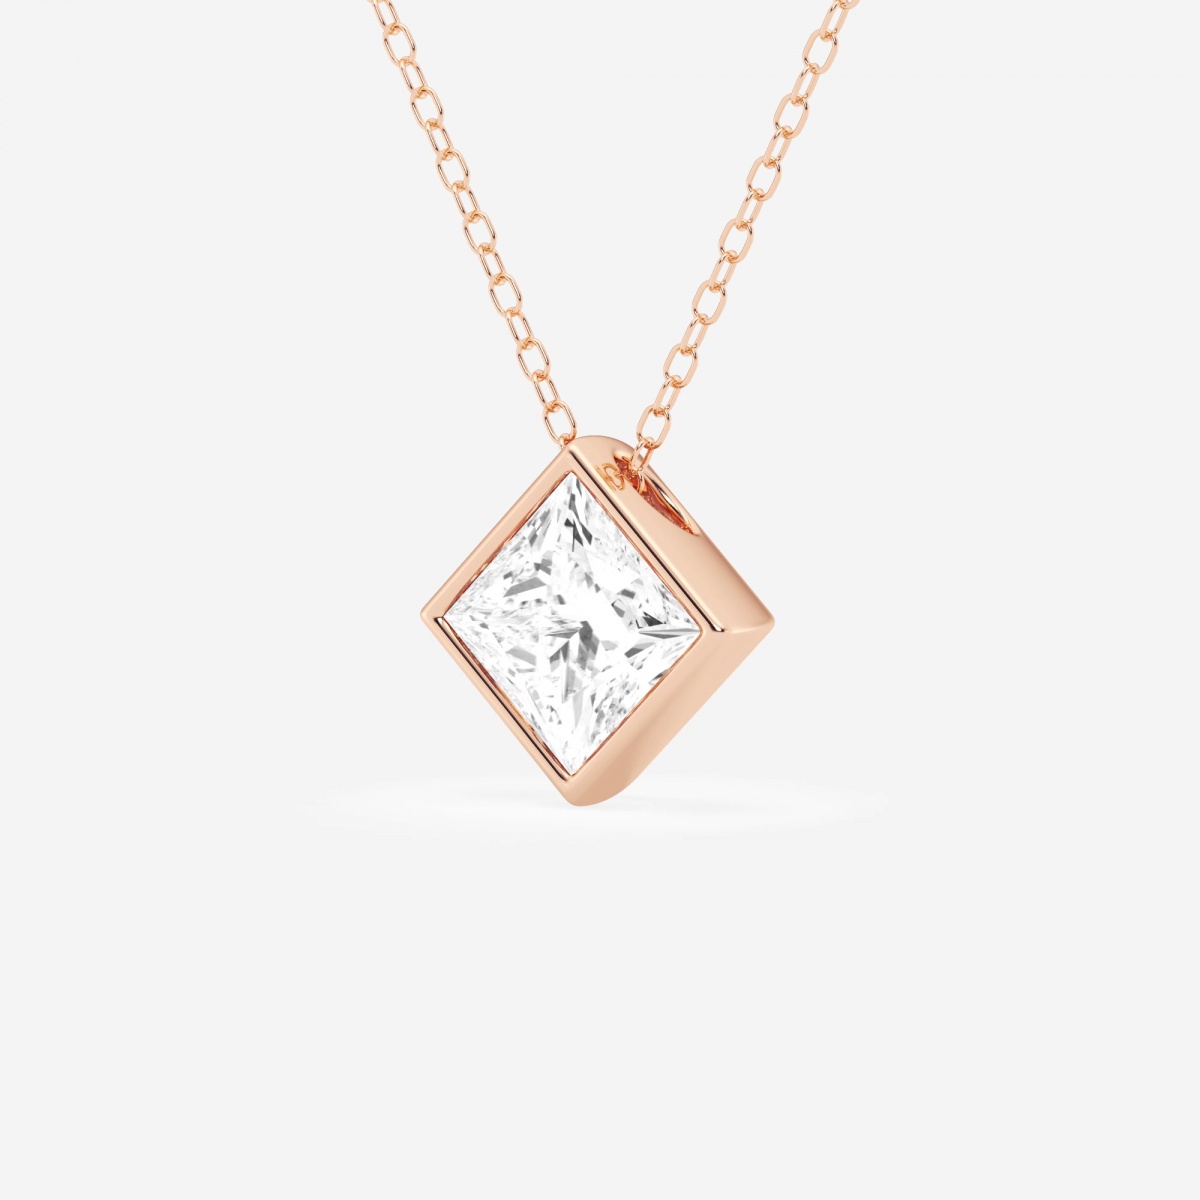 Additional Image 1 for  1 1/2 ctw Princess Lab Grown Diamond Bezel Set Solitaire Pendant with Adjustable Chain